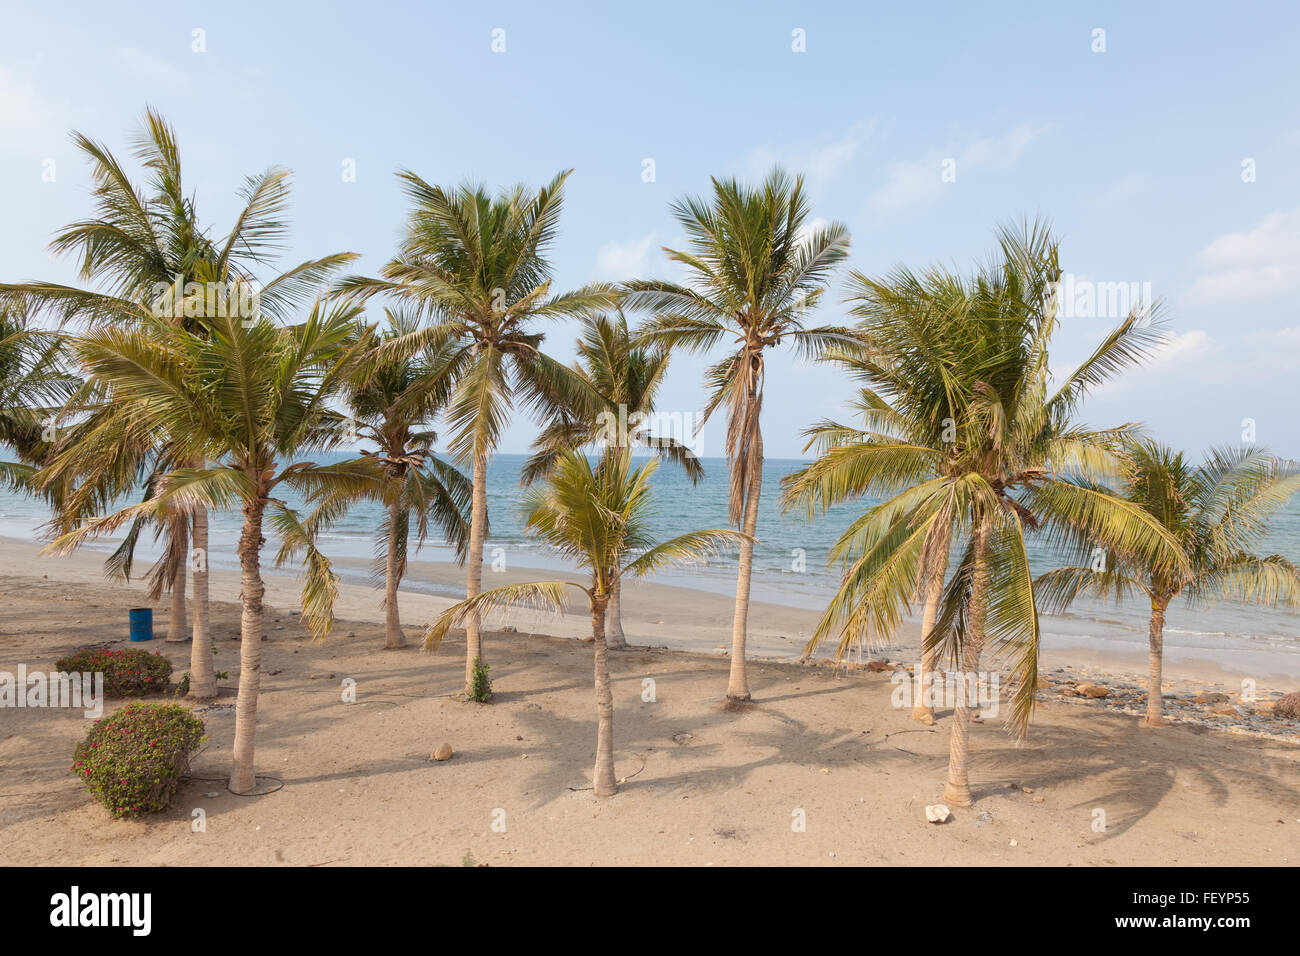 Palm trees on the beach in Oman Stock Photo